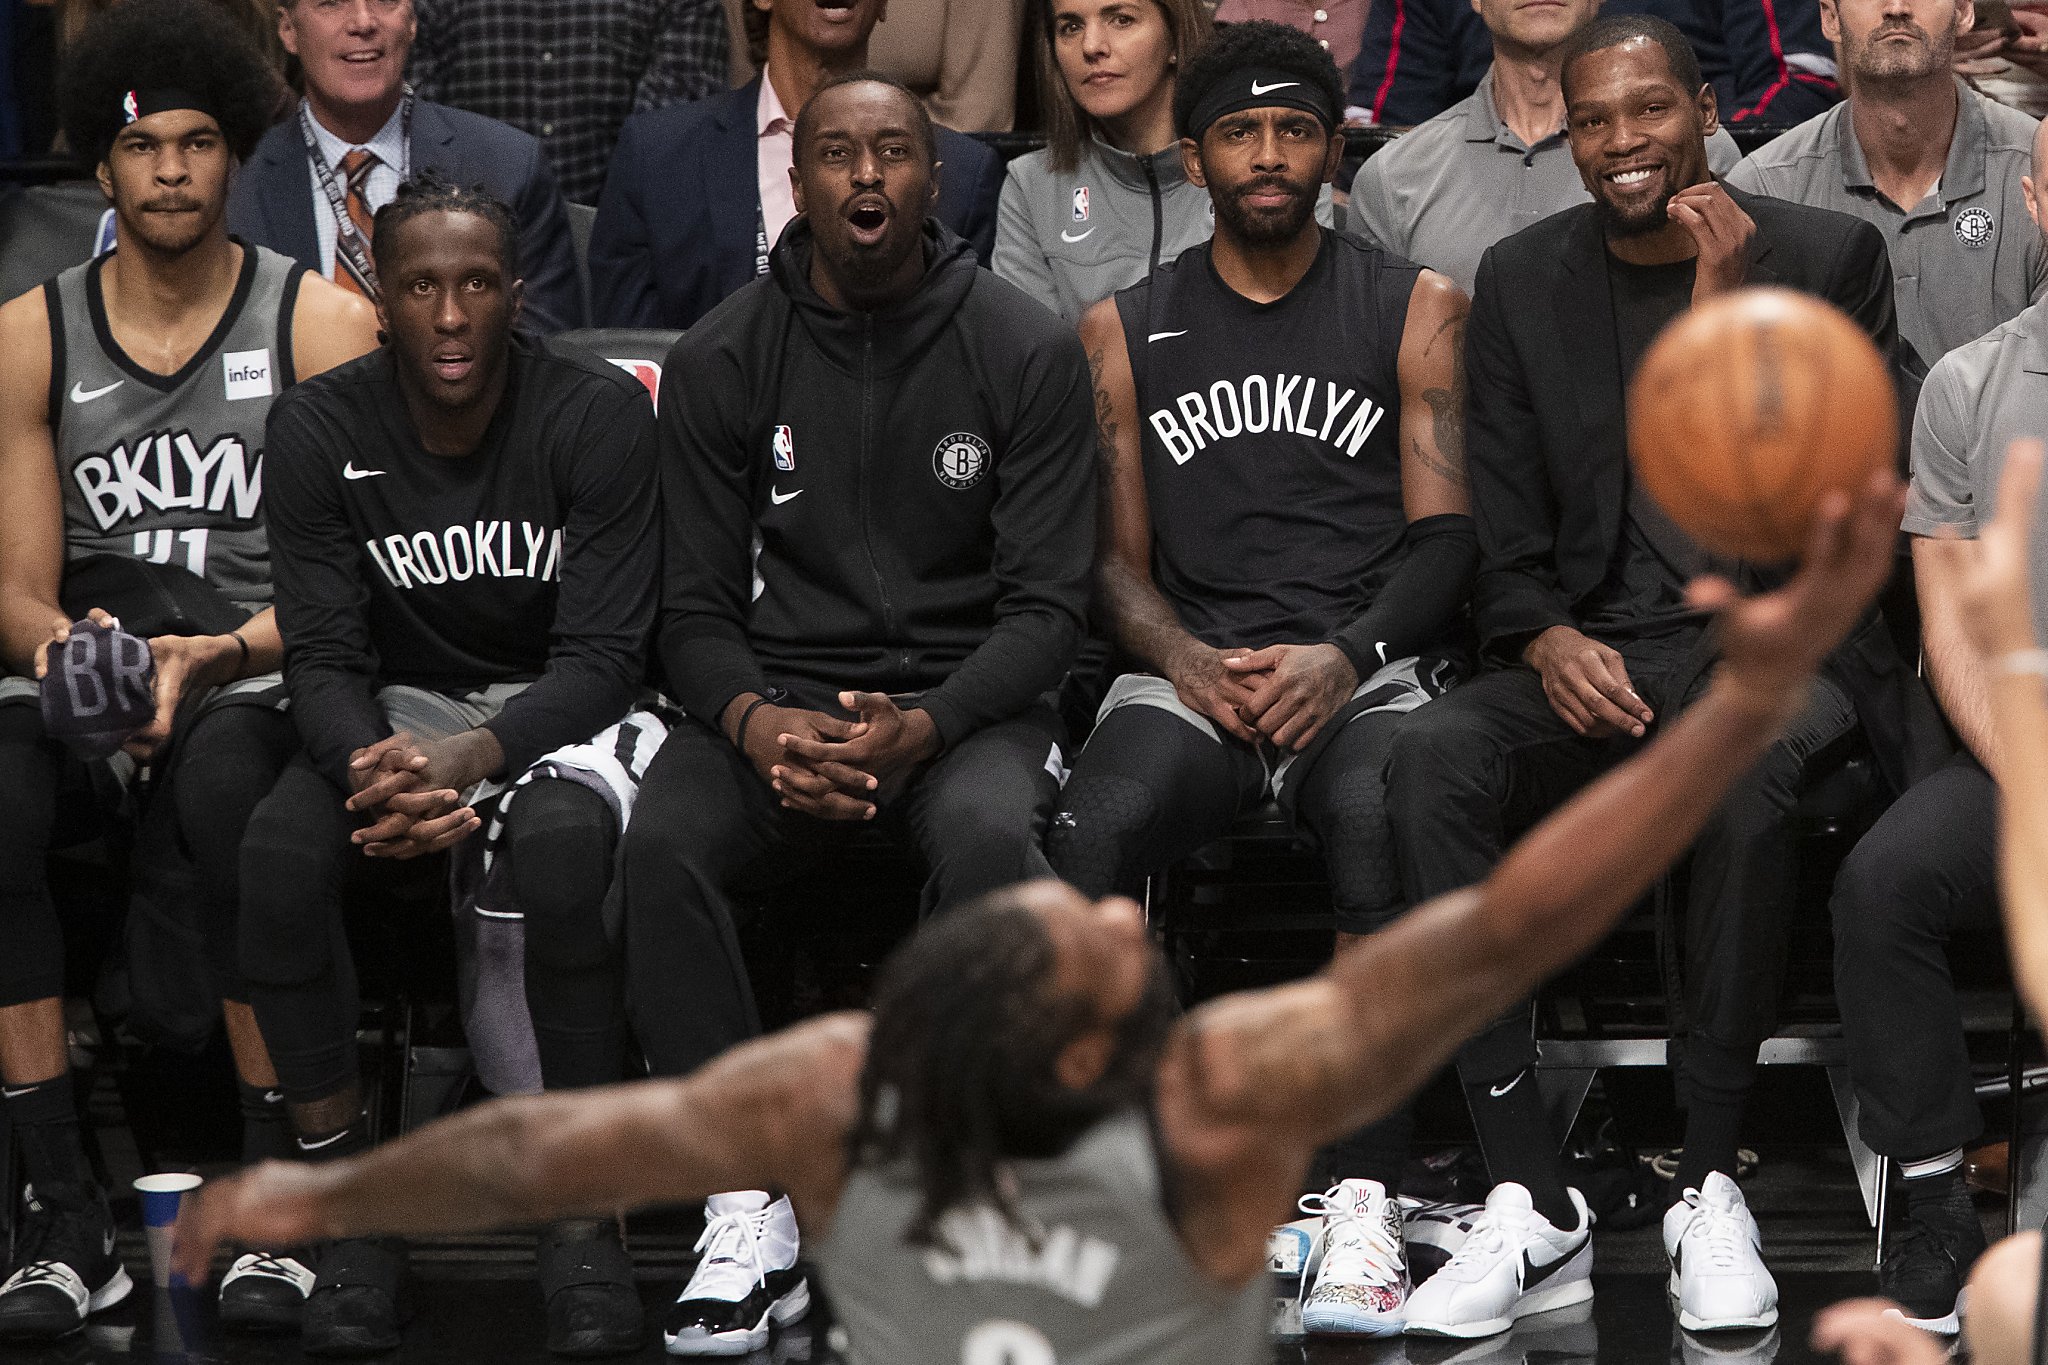 Kevin Durant, Kyrie Irving and the Nets: The story is in street clothes